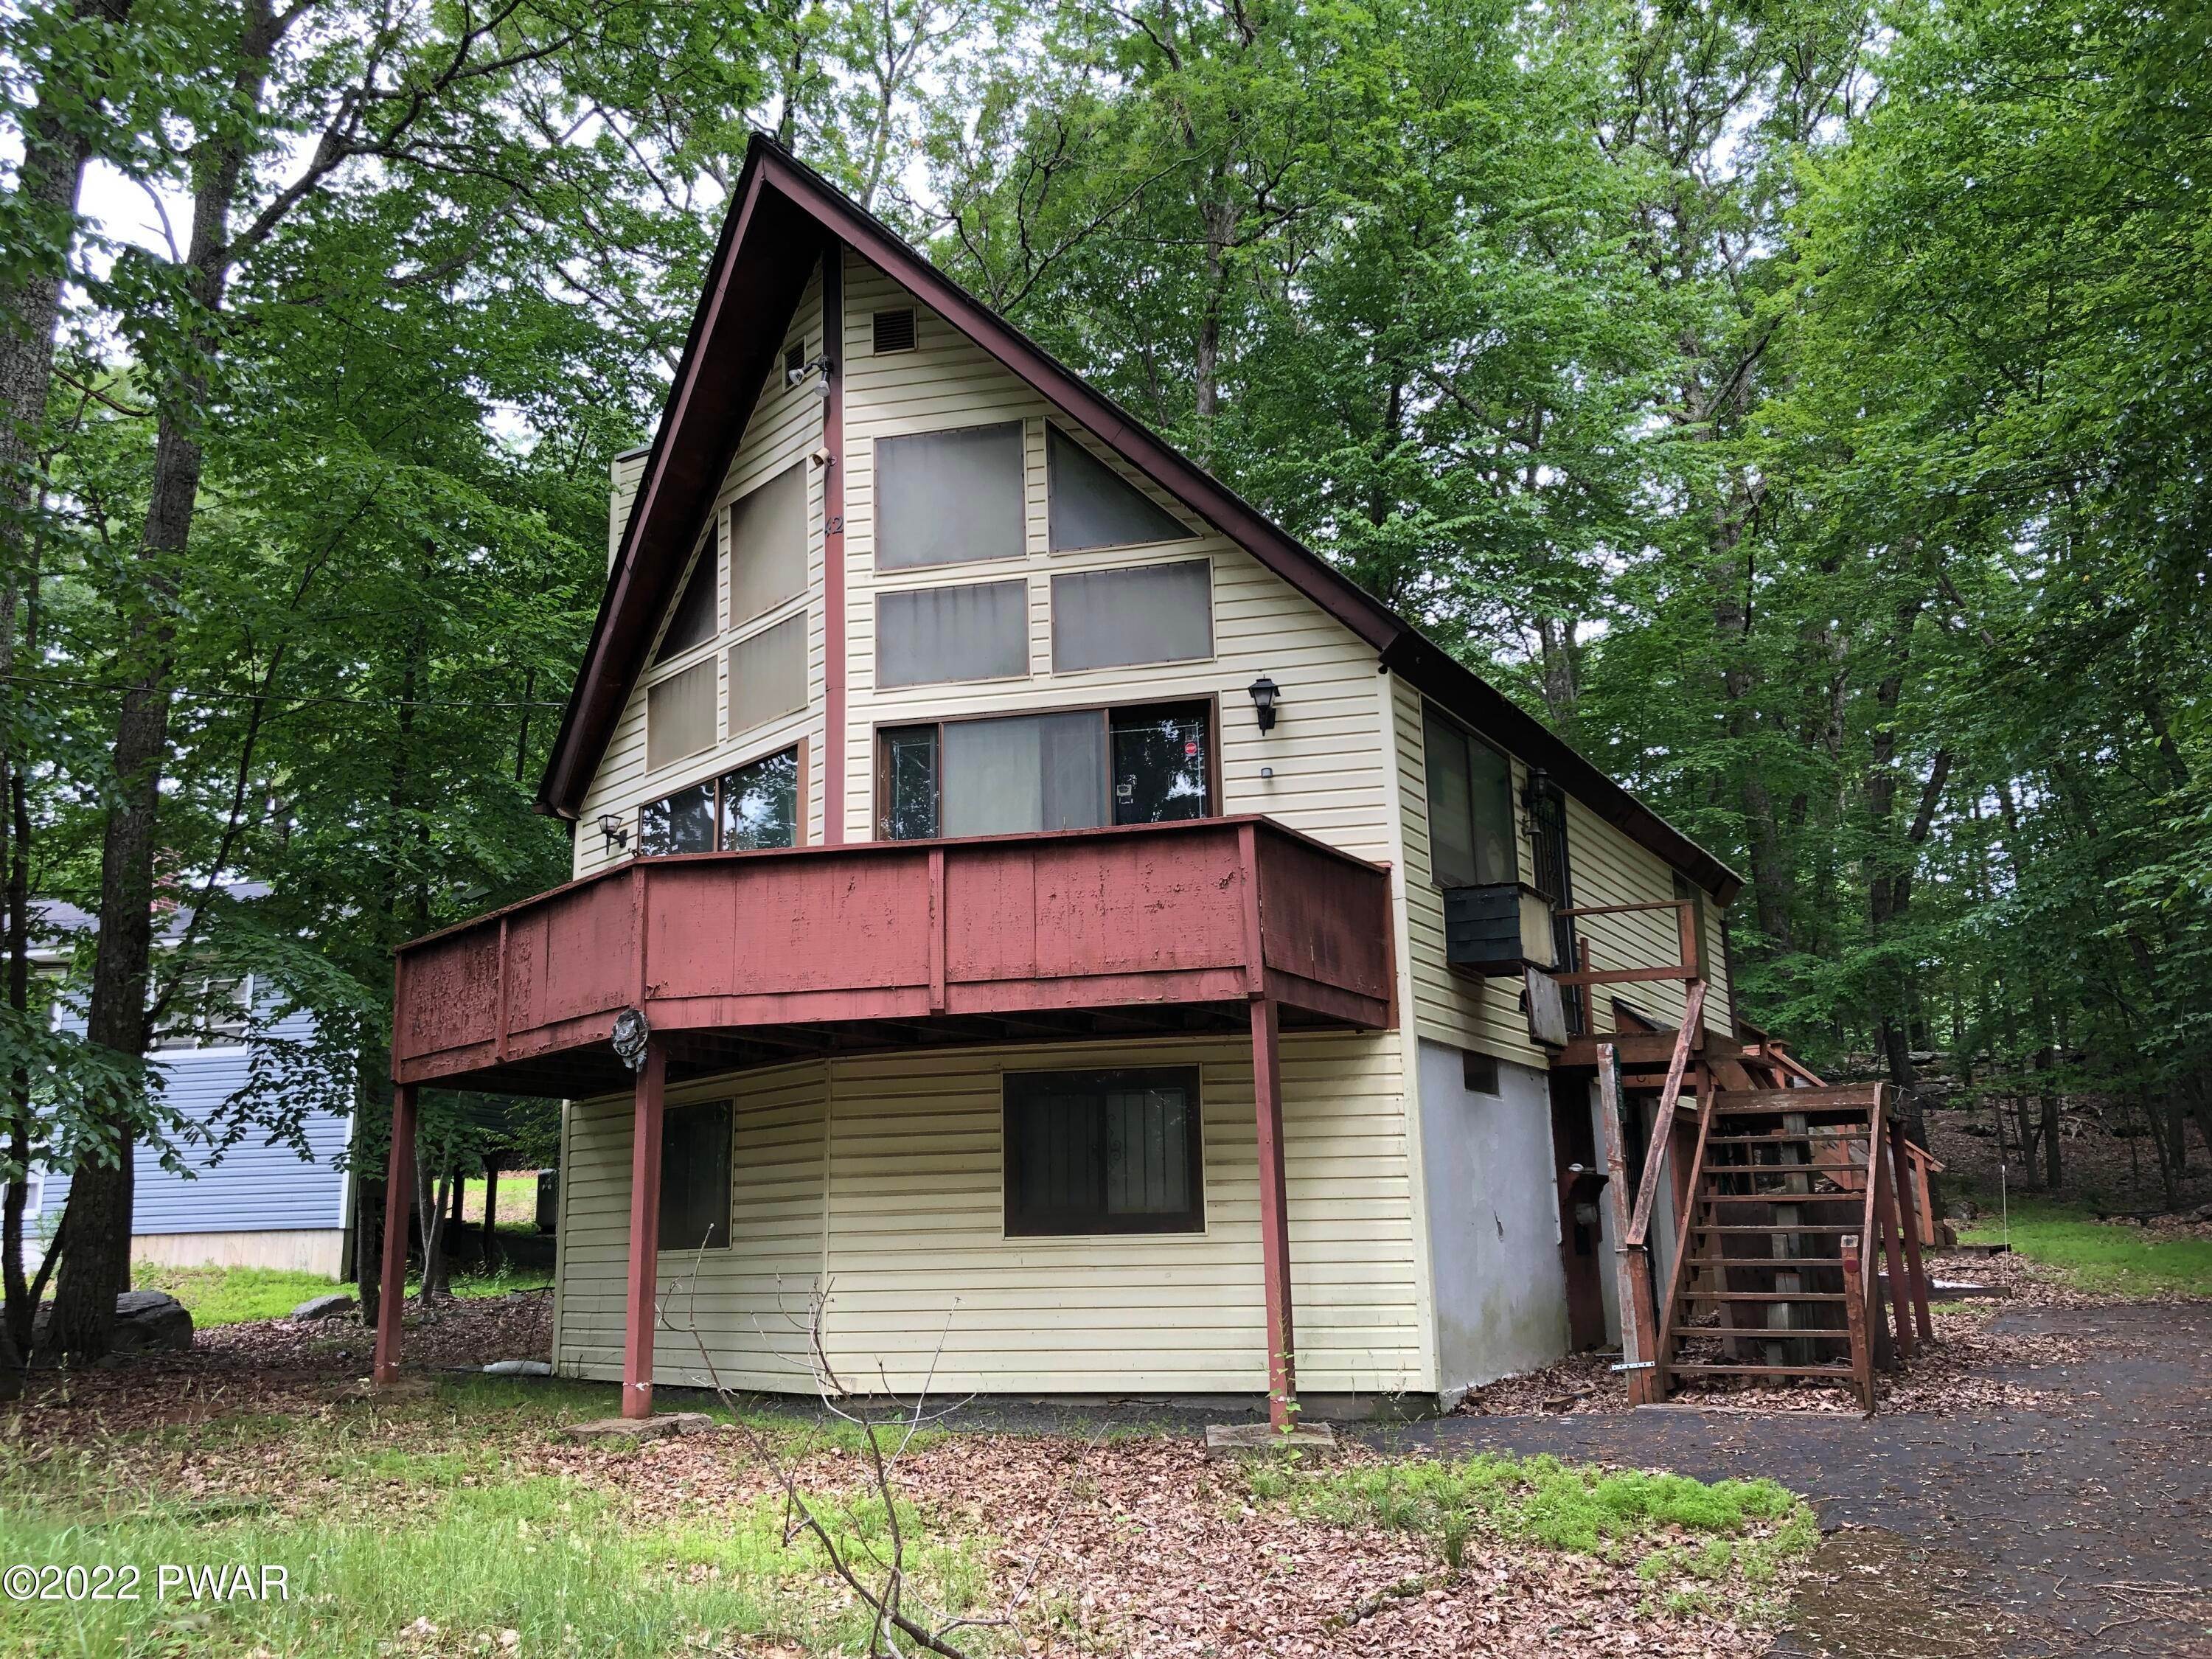 Property for Sale at 226 Mountain Lake Dr Dingmans Ferry, Pennsylvania 18328 United States